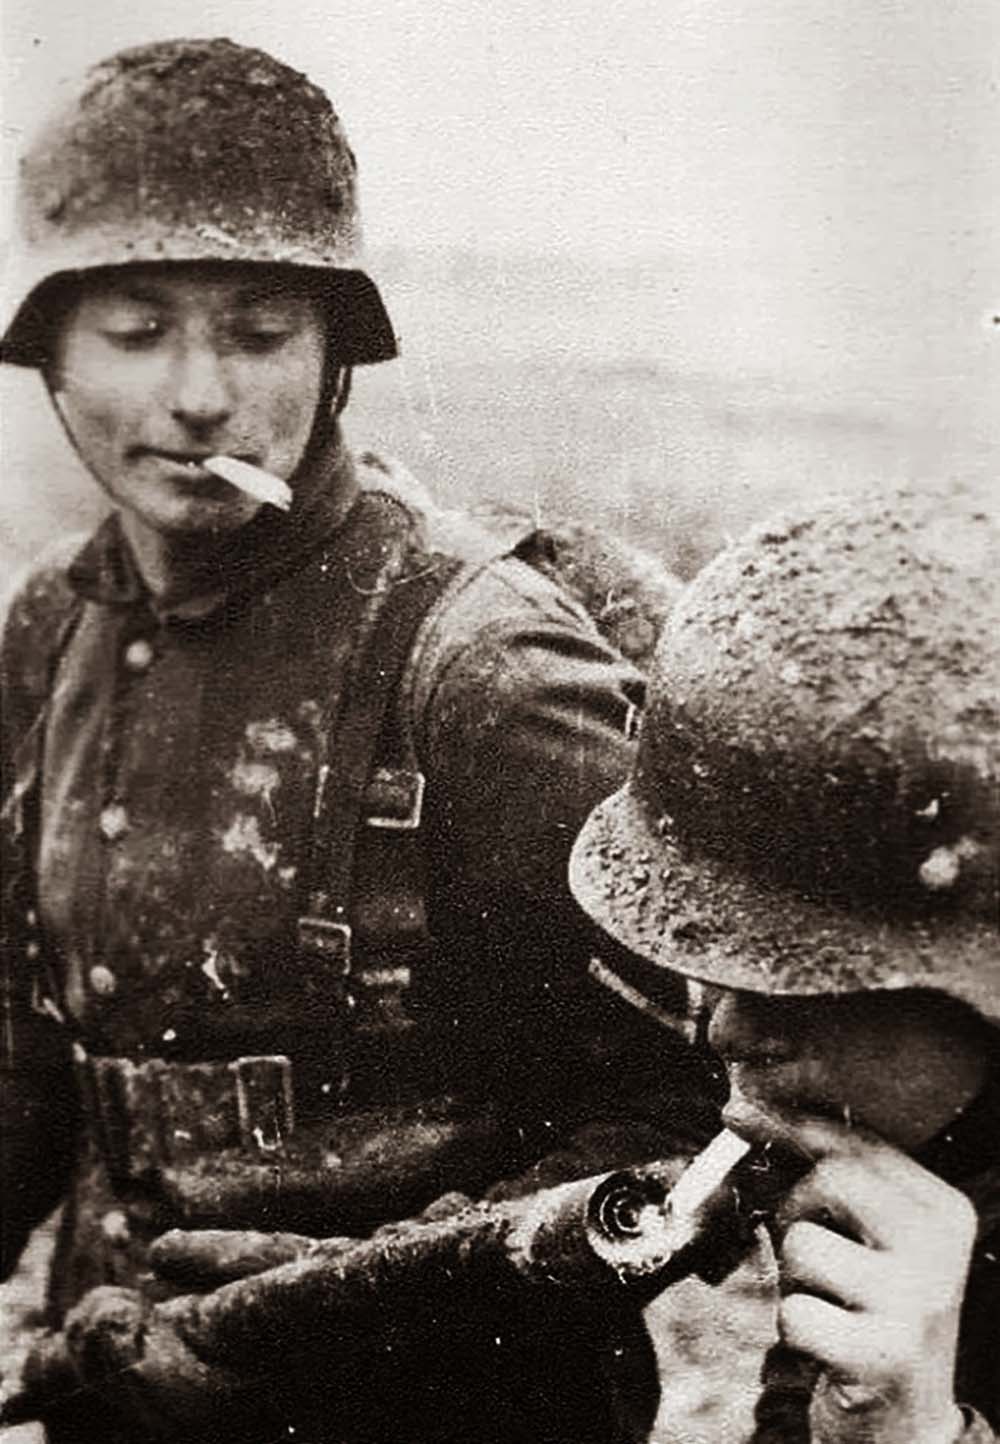 German soldier lighting his cigarette with a flamethrower, 1917.

The flamethrower, which brought terror to French and British soldiers was used by the German army in the early phases of the First World War in 1914 and 1915 (and which was quickly adopted by both). The Flammenwerfers (flamethrowers) tended to be used in groups of six during battle, each machine worked by two men. They were used mostly to clear forward defenders during the start of a German attack, preceding their infantry colleagues. They were undeniably useful when used at short-range, but were of limited wider effectiveness, especially once the British and French had overcome their initial alarm at their use. The operators of Flammenwerfer equipment also lived a most dangerous existence.
Quite aside from the worries of handling the device – it was entirely feasible that the cylinder carrying the fuel might unexpectedly explode – they were marked men; the British and French poured rifle-fire into the area of attack where Flammenwerfers were used, and their operators could expect no mercy should they be taken prisoner. Their life expectancy was therefore short.